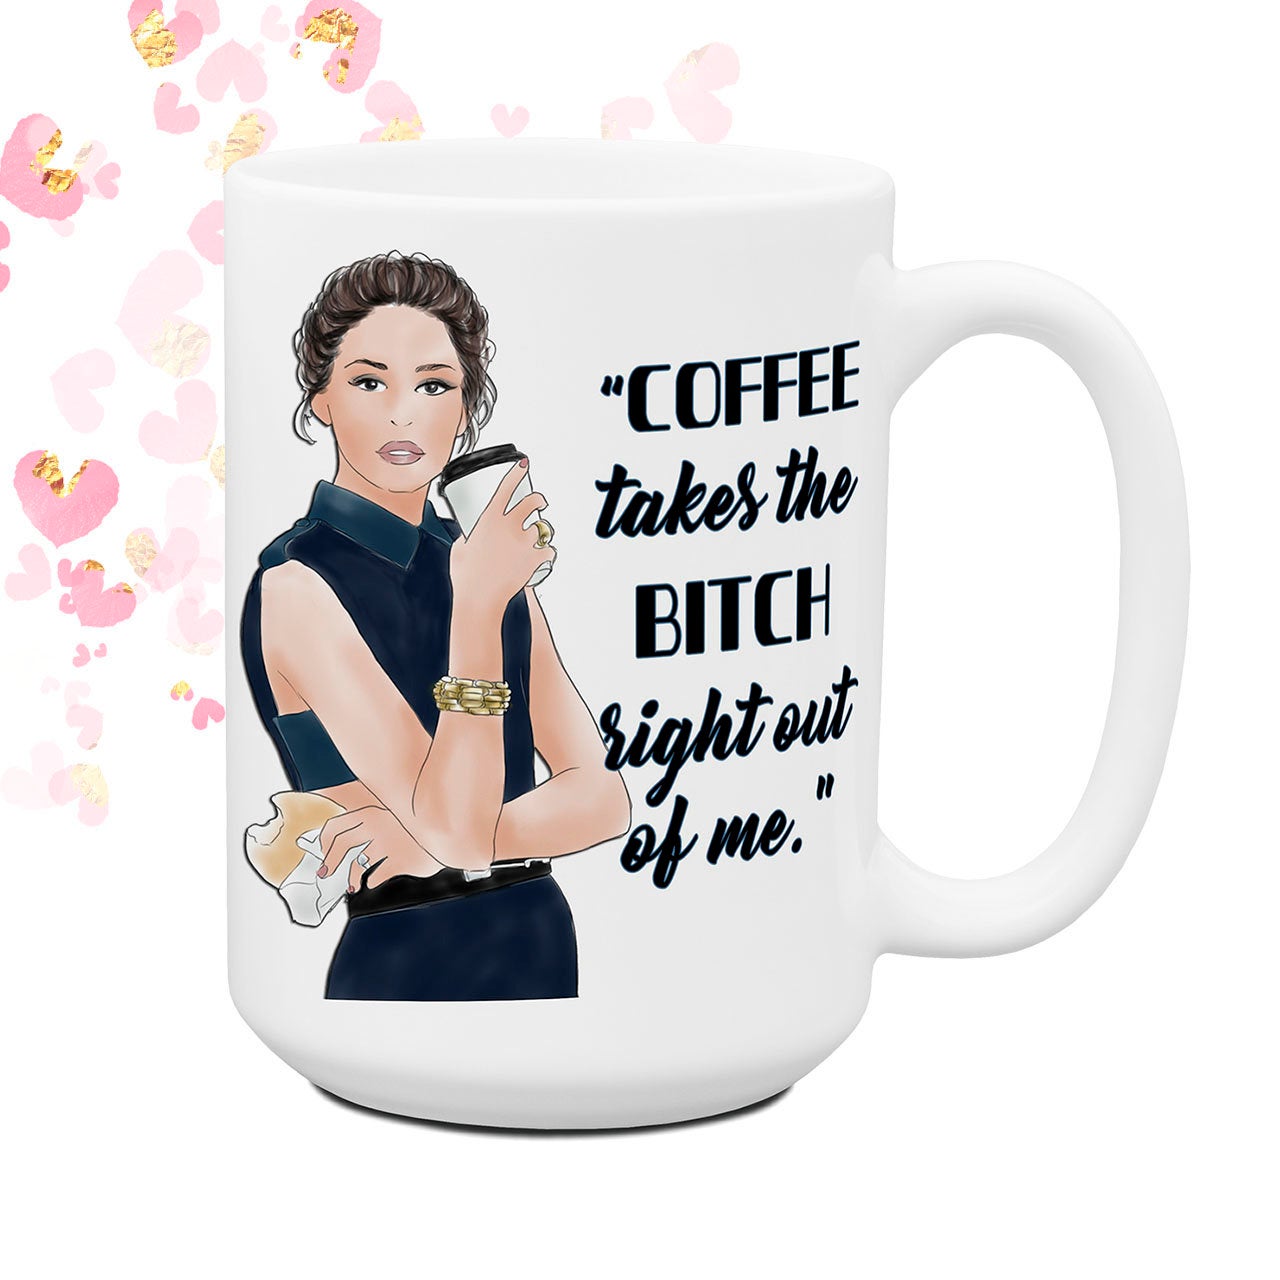 Office Coffee Cups Funny Sassy Attitude Mugs for Women Coffee Takes the Bitch Out of Me